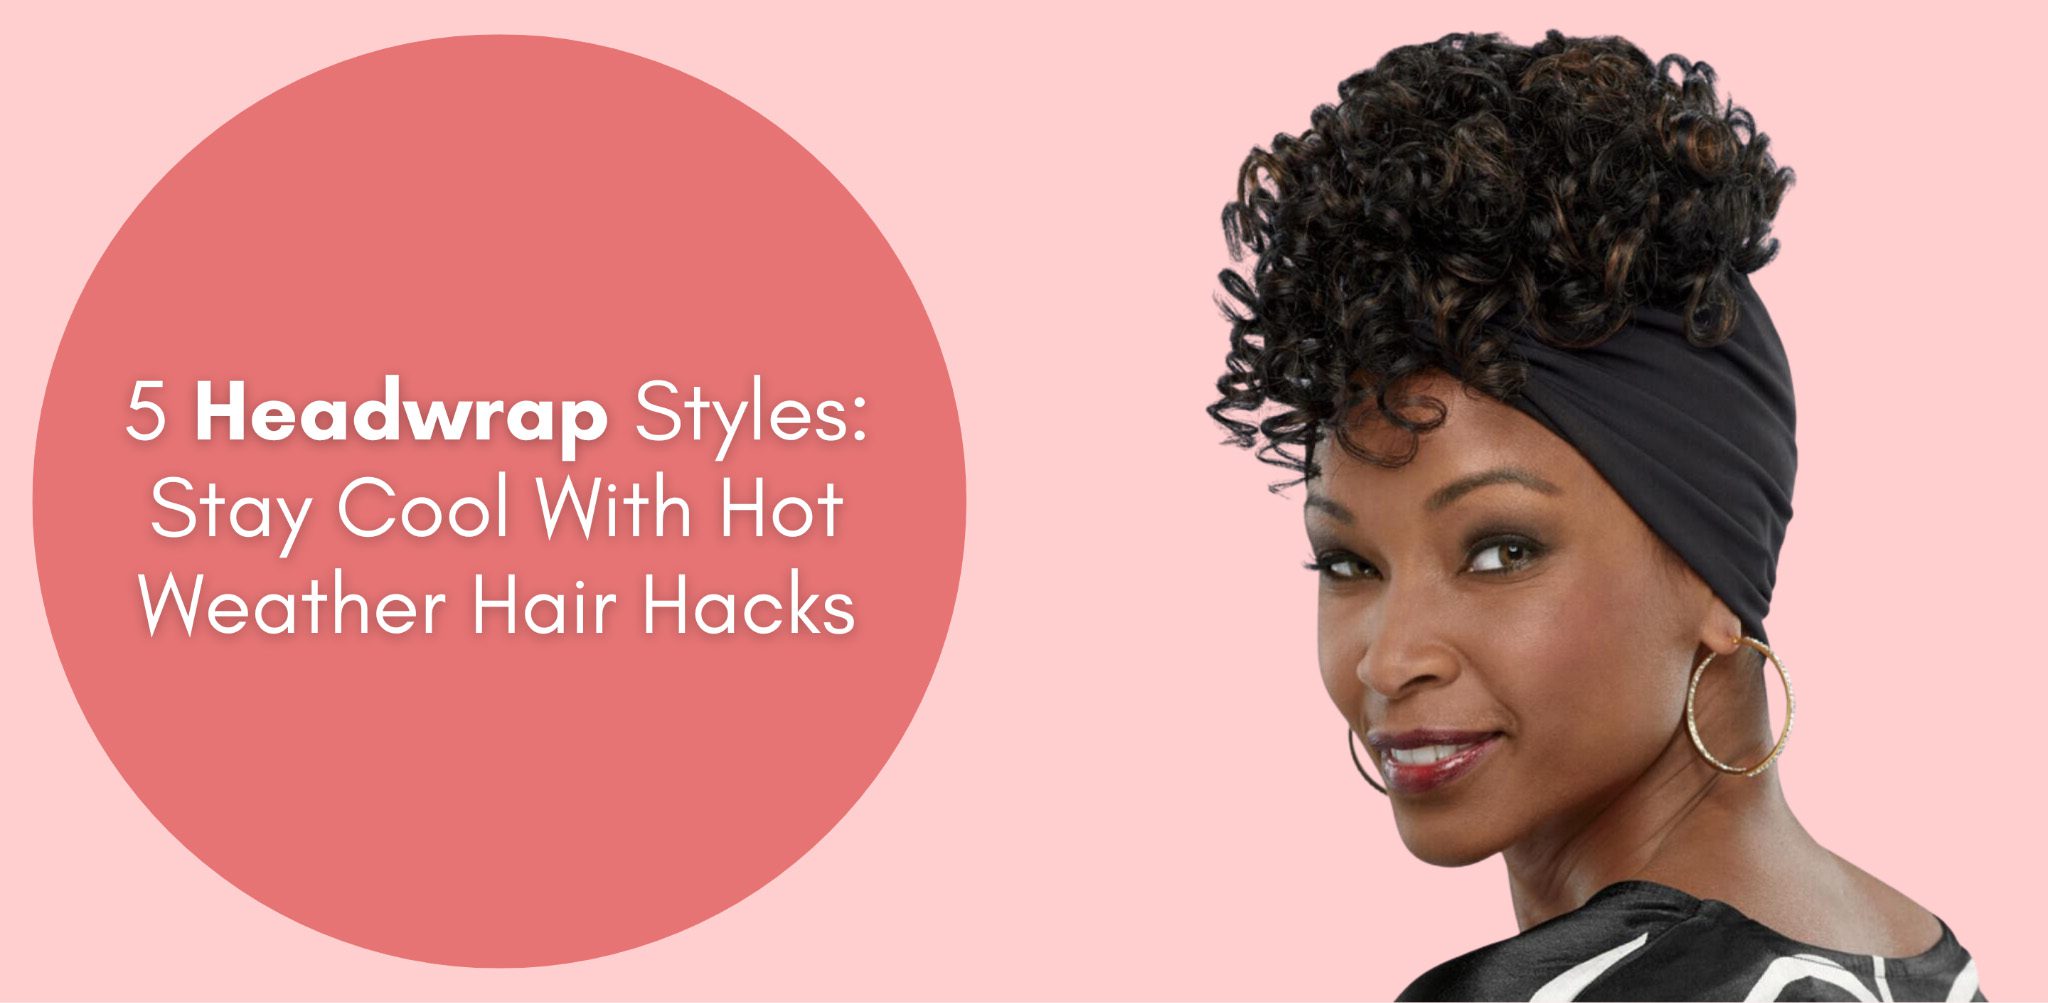 5 headwrap styles stay cool with hot weather hair hacks